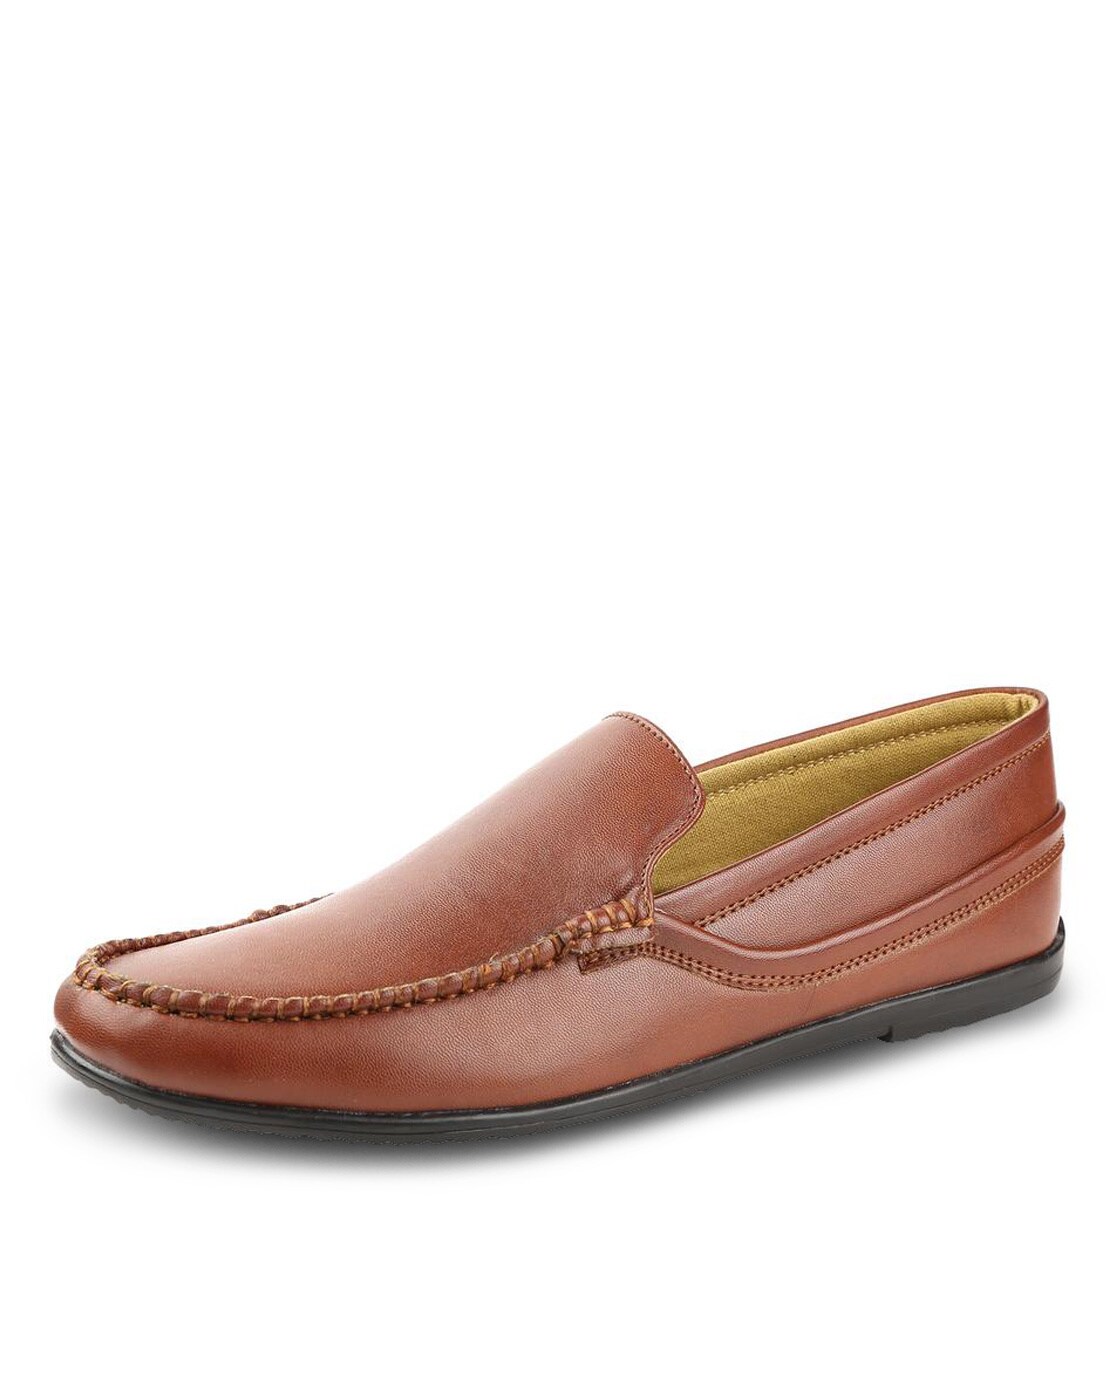 peter england leather shoes